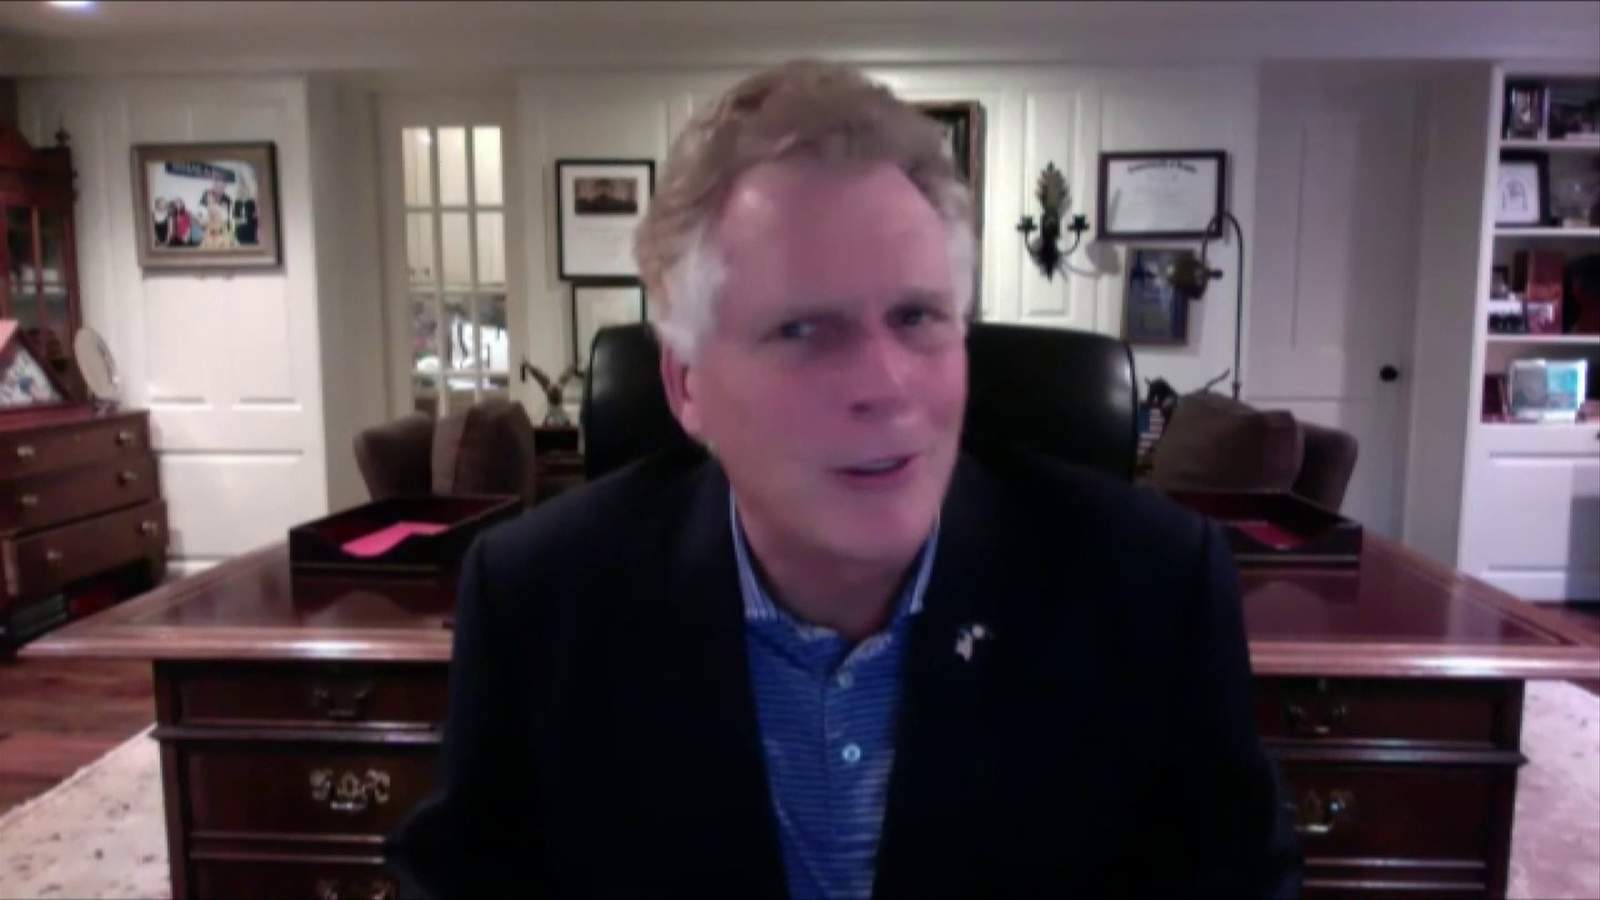 Former Virginia Governor Terry McAuliffe on police reform, 2020 election, among other issues